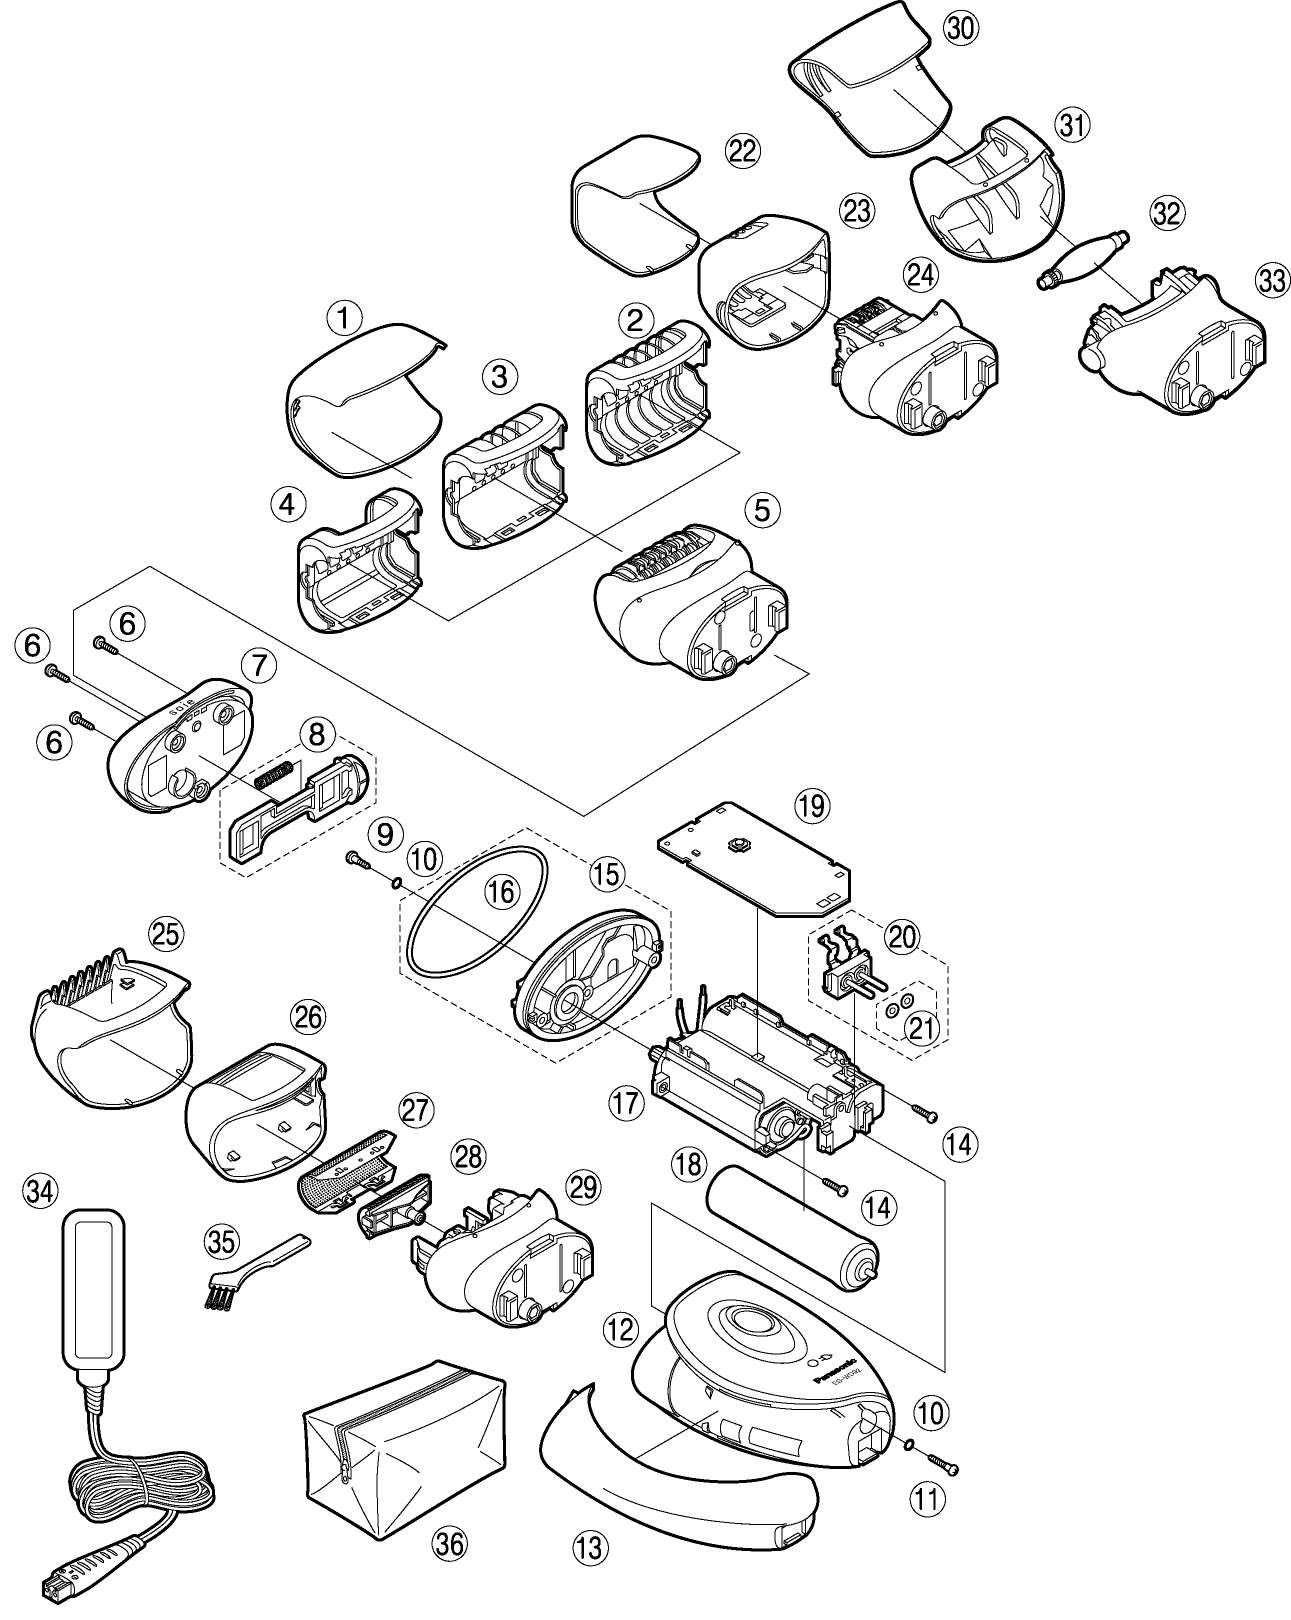 ES-WD92: Exploded View